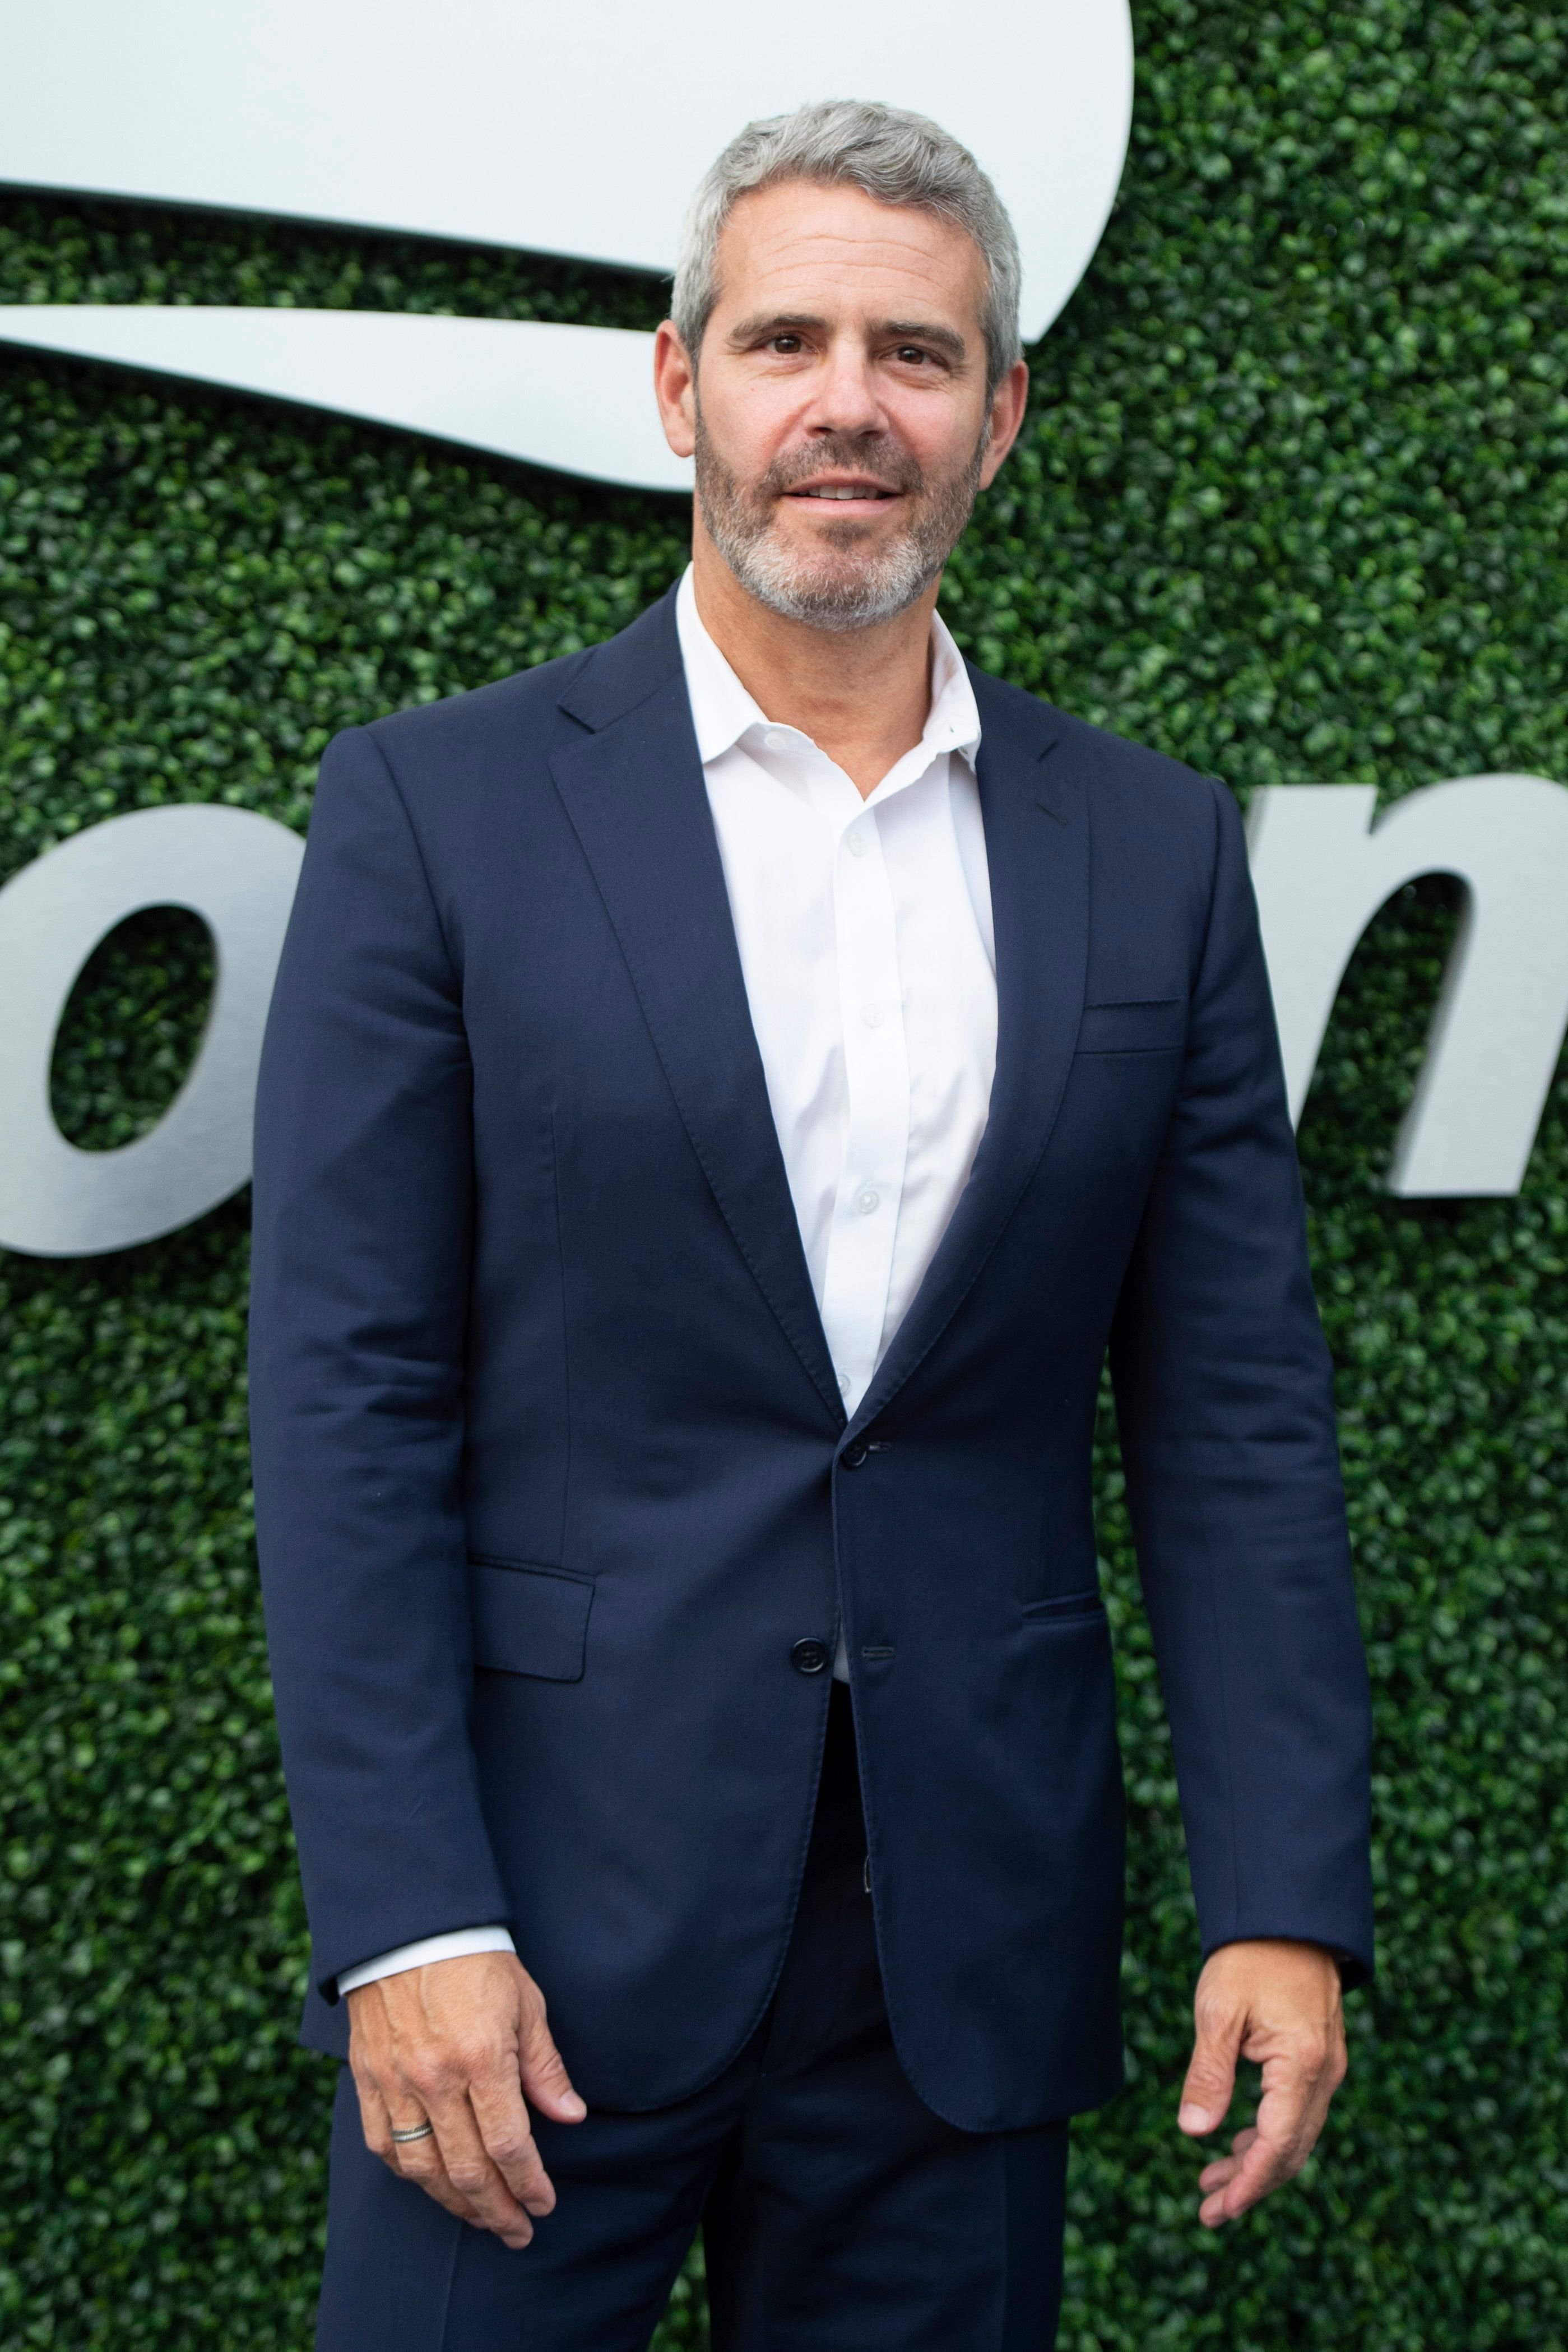 Andy Cohen attends the US Open on September 5, 2019, in New York City. | Source: Getty Images